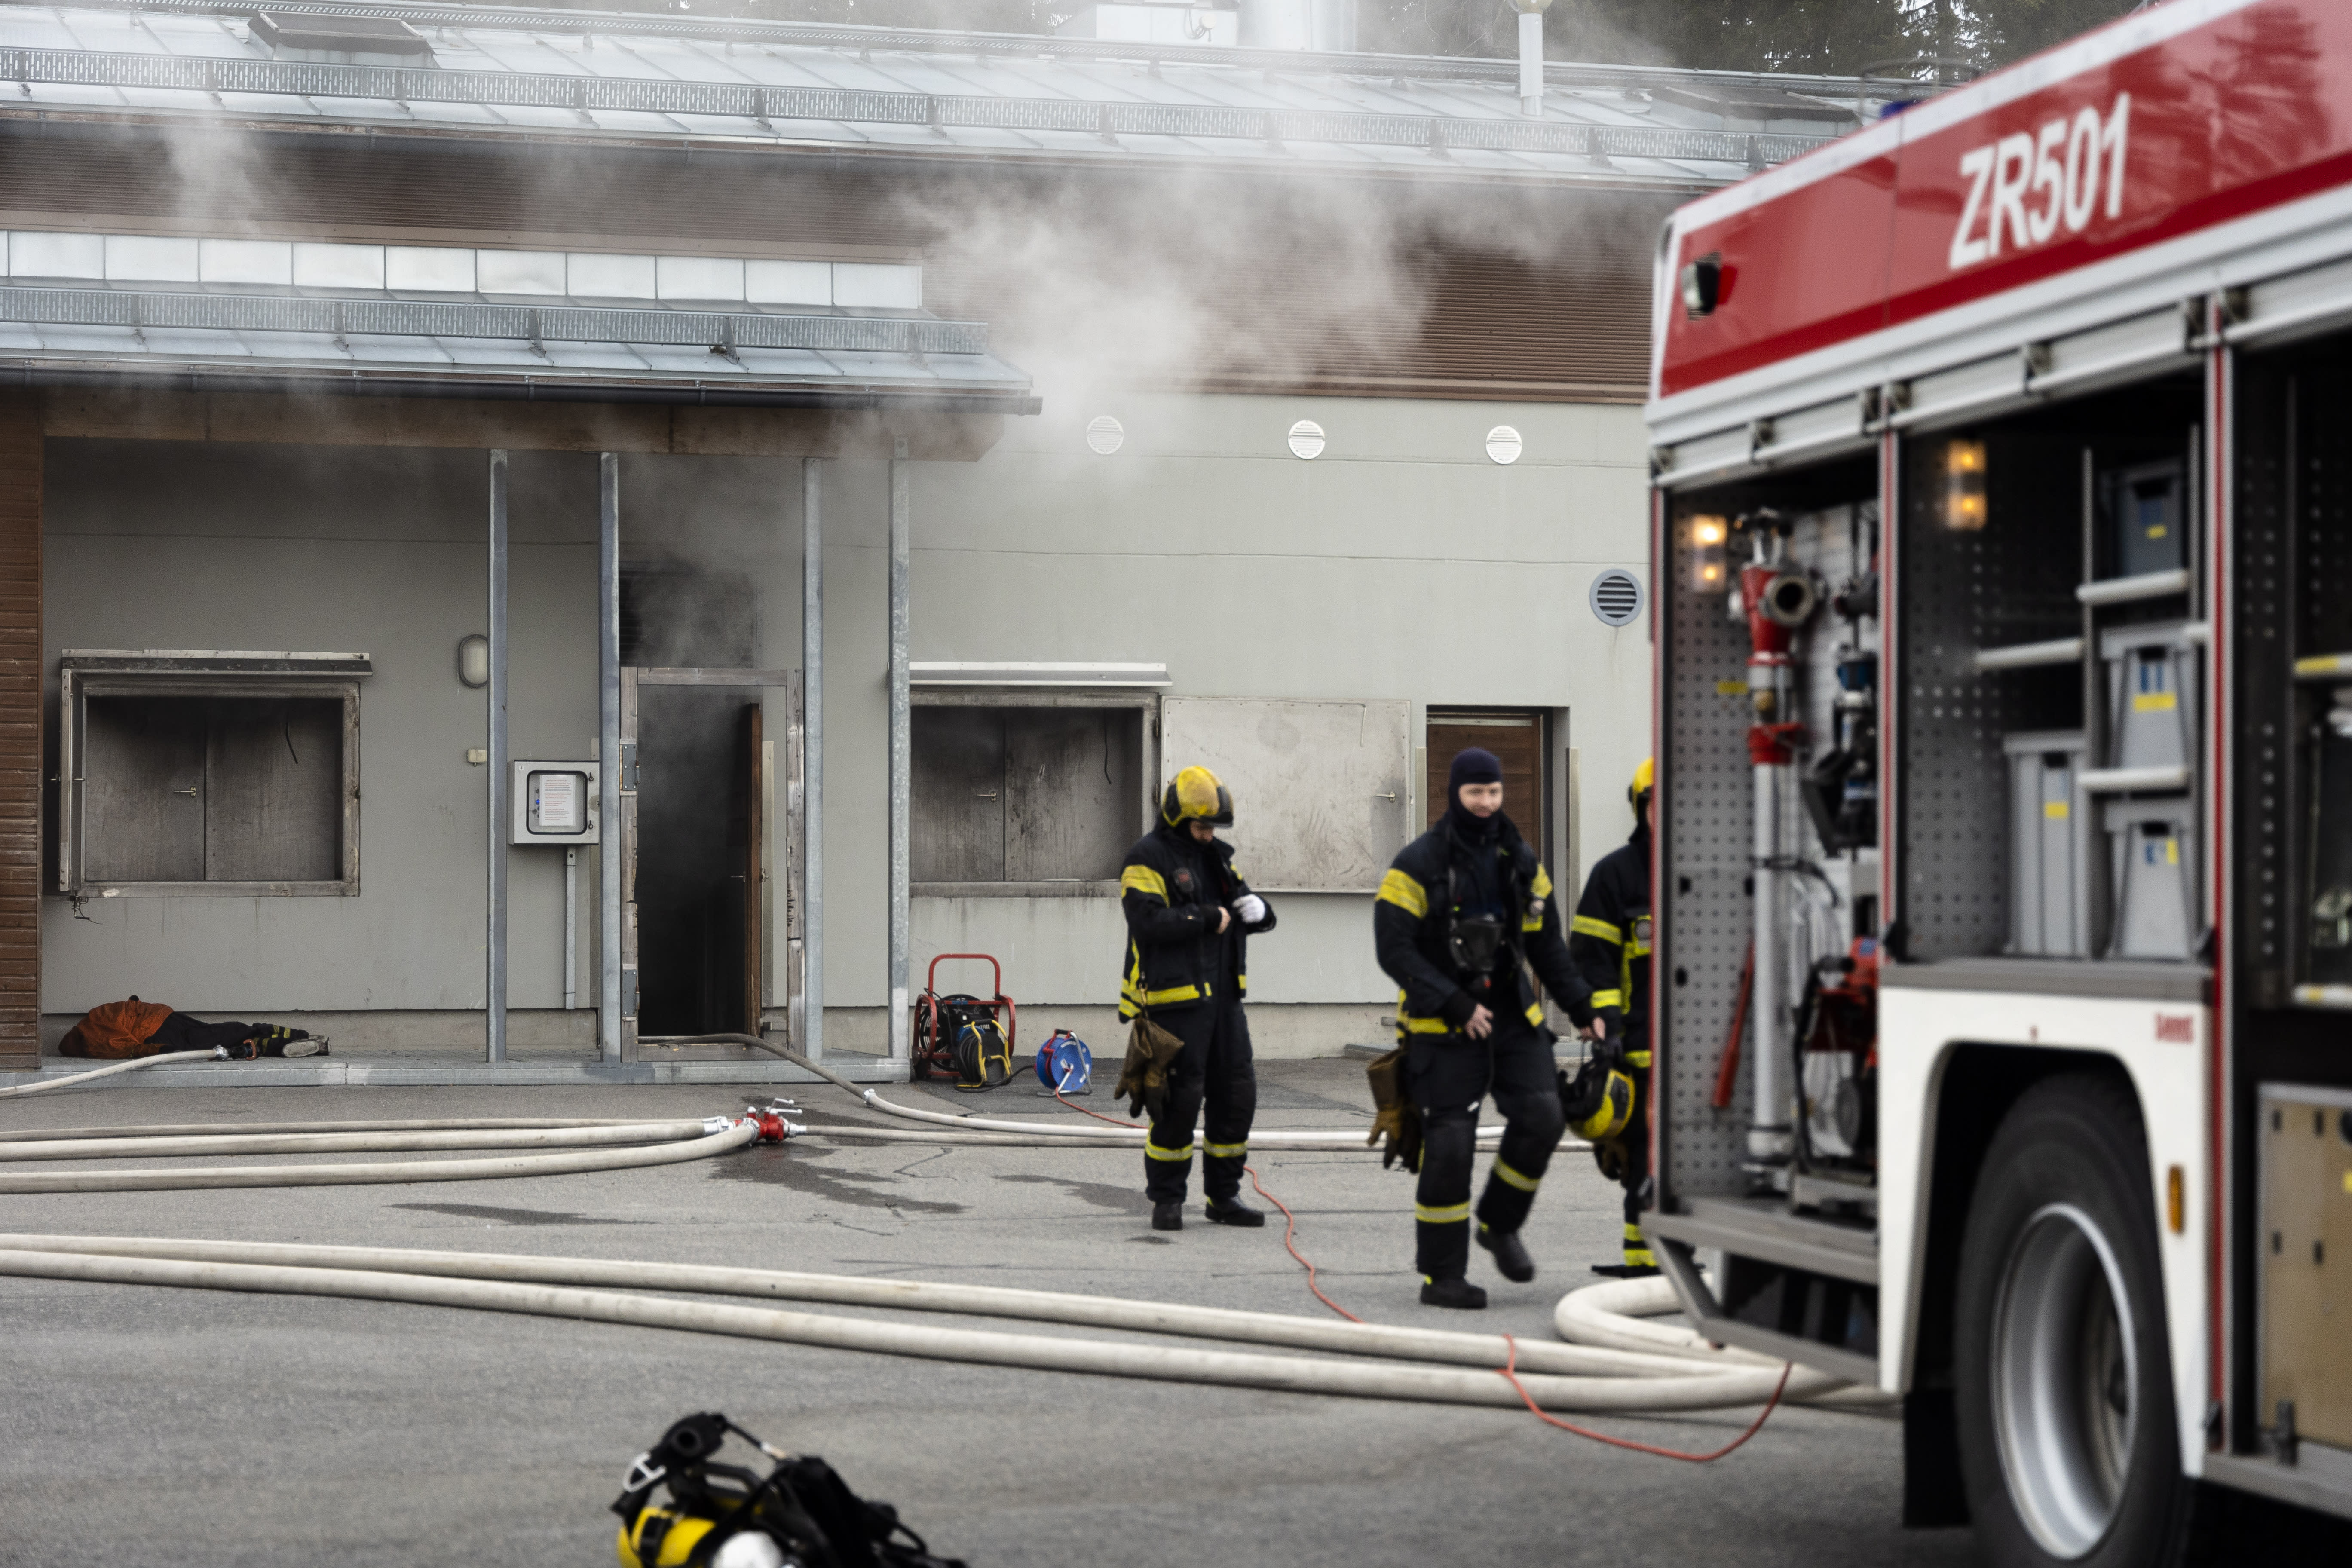 There is a severe shortage of rescue service personnel in Finland, warns the head of the Academy